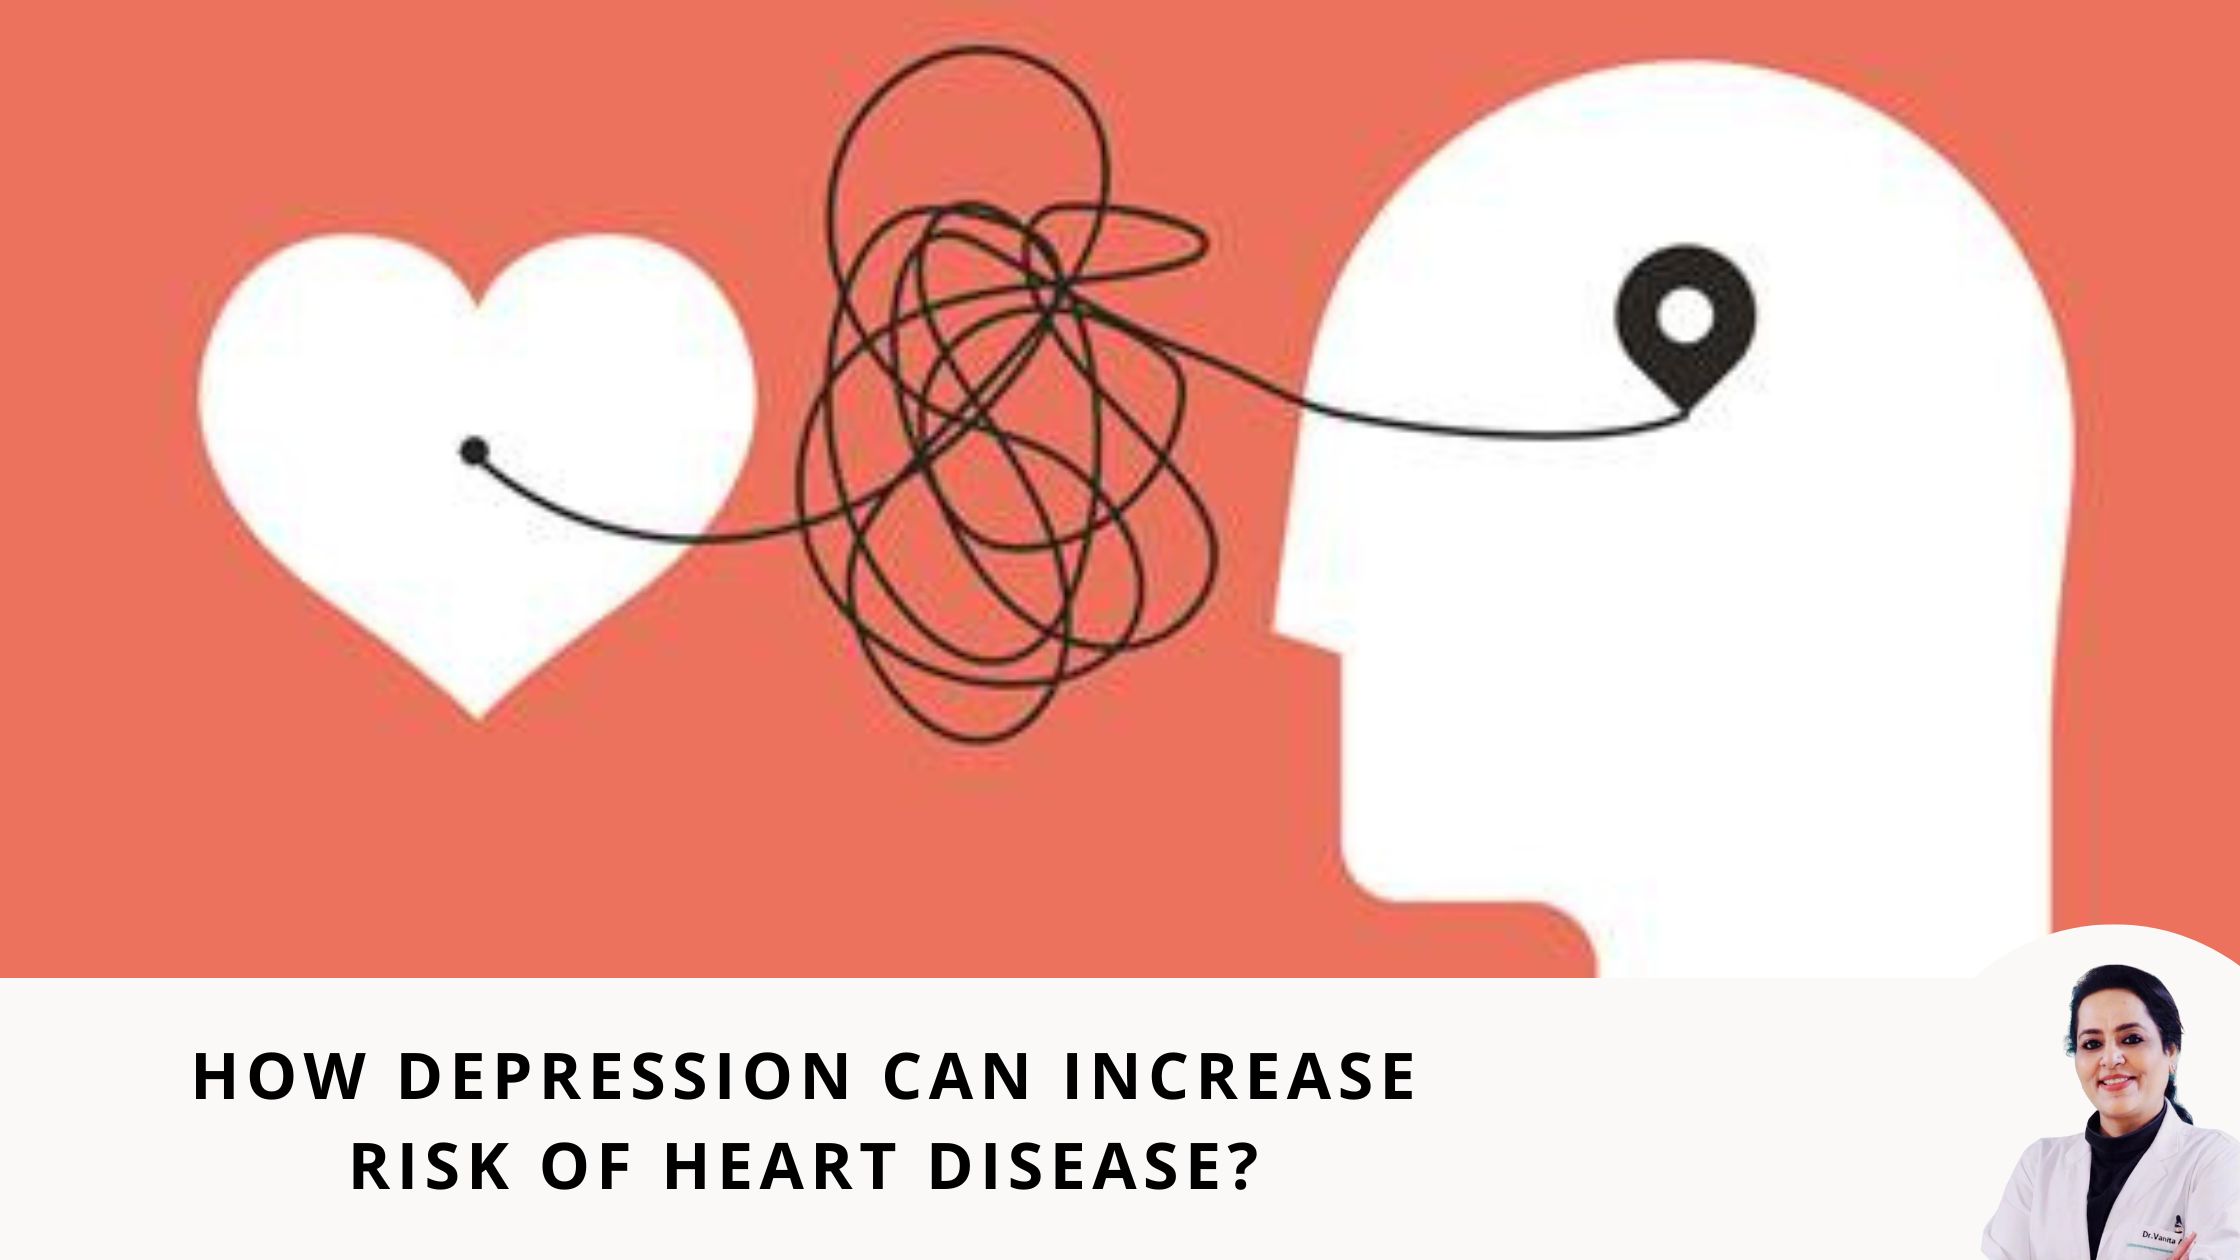 How Depression Can Increase Risk of Heart Disease?